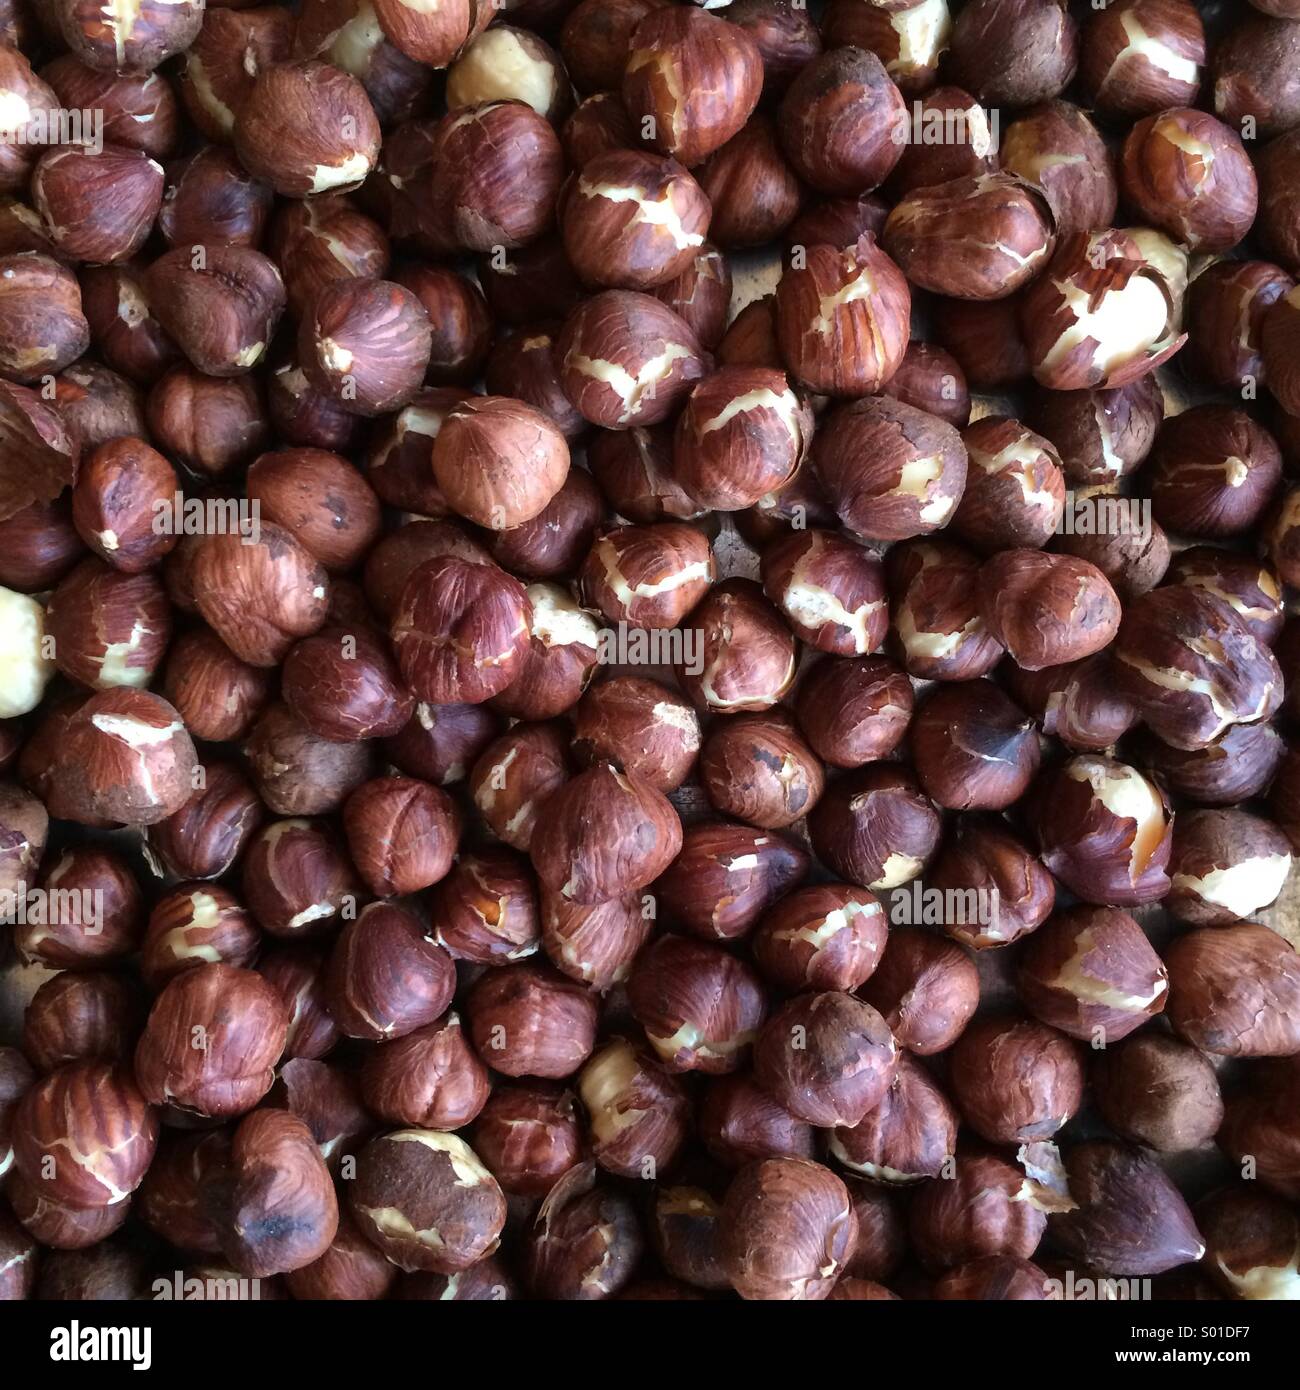 Toasted hazelnuts or filberts with the skins still on. Stock Photo